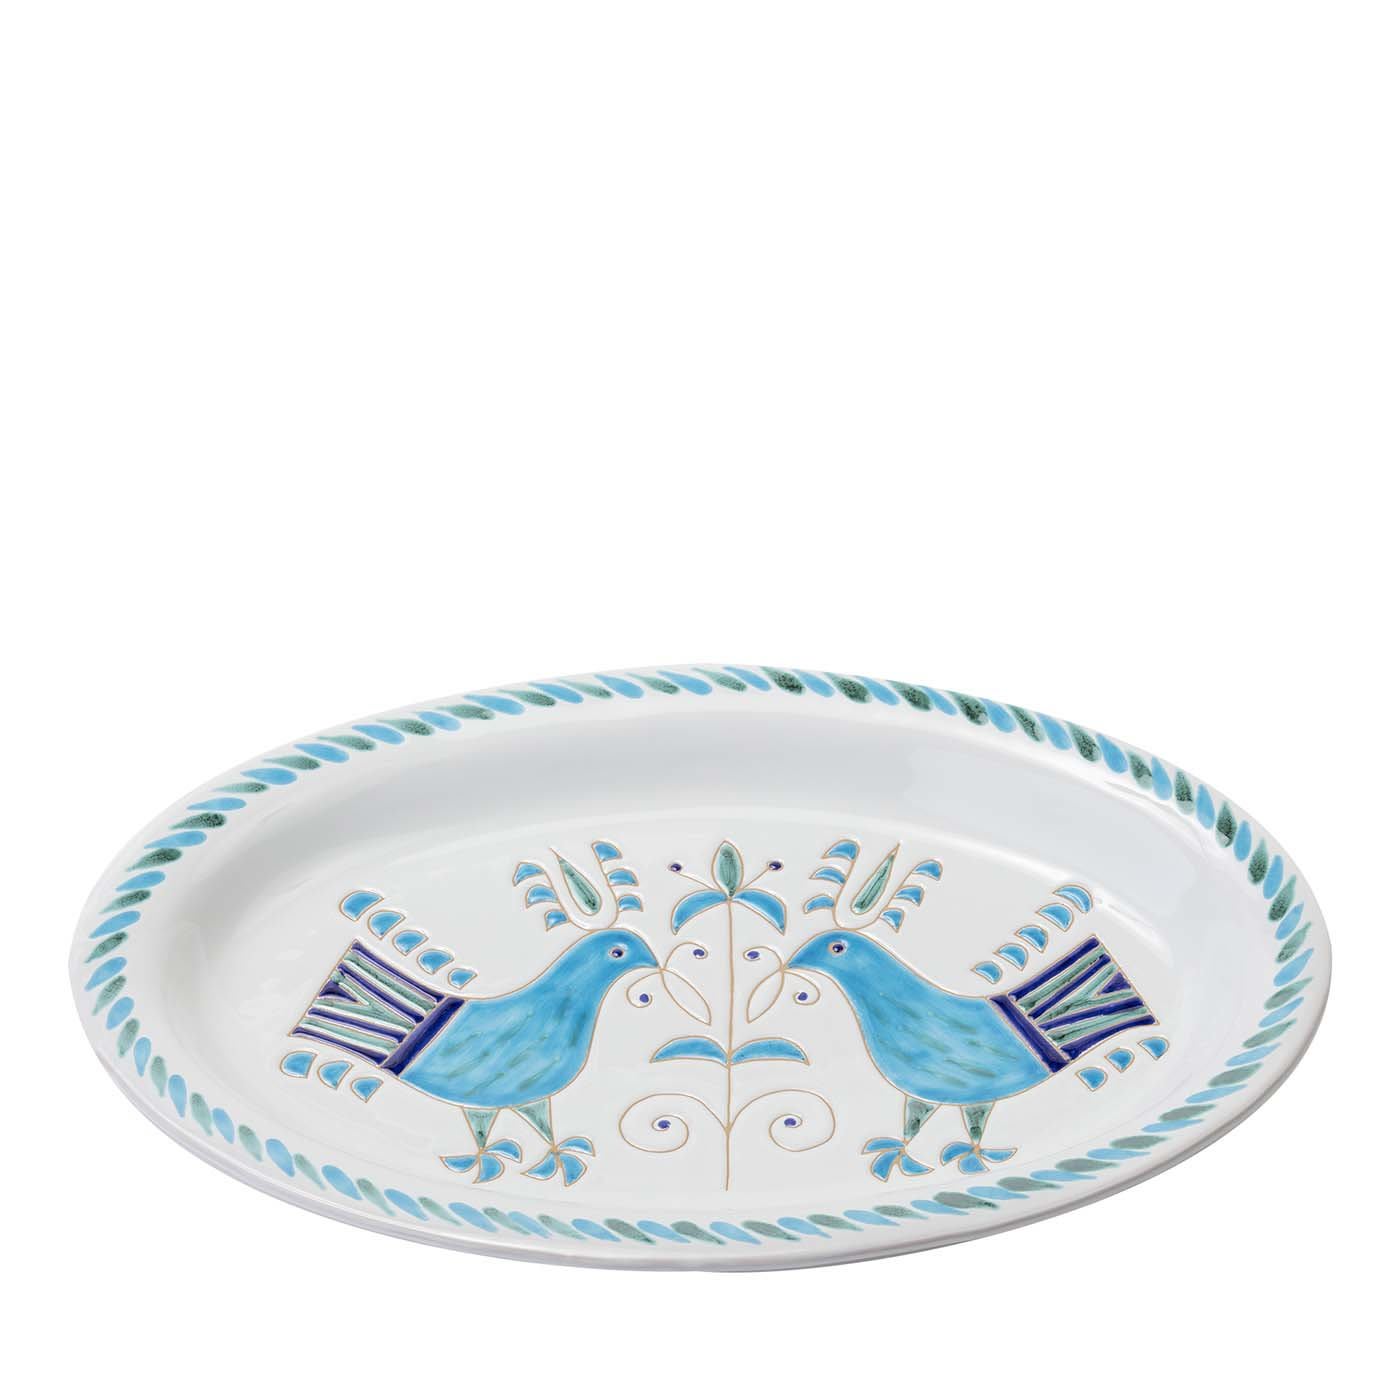 Le Pavoncelle Oval Tray - Cerasarda